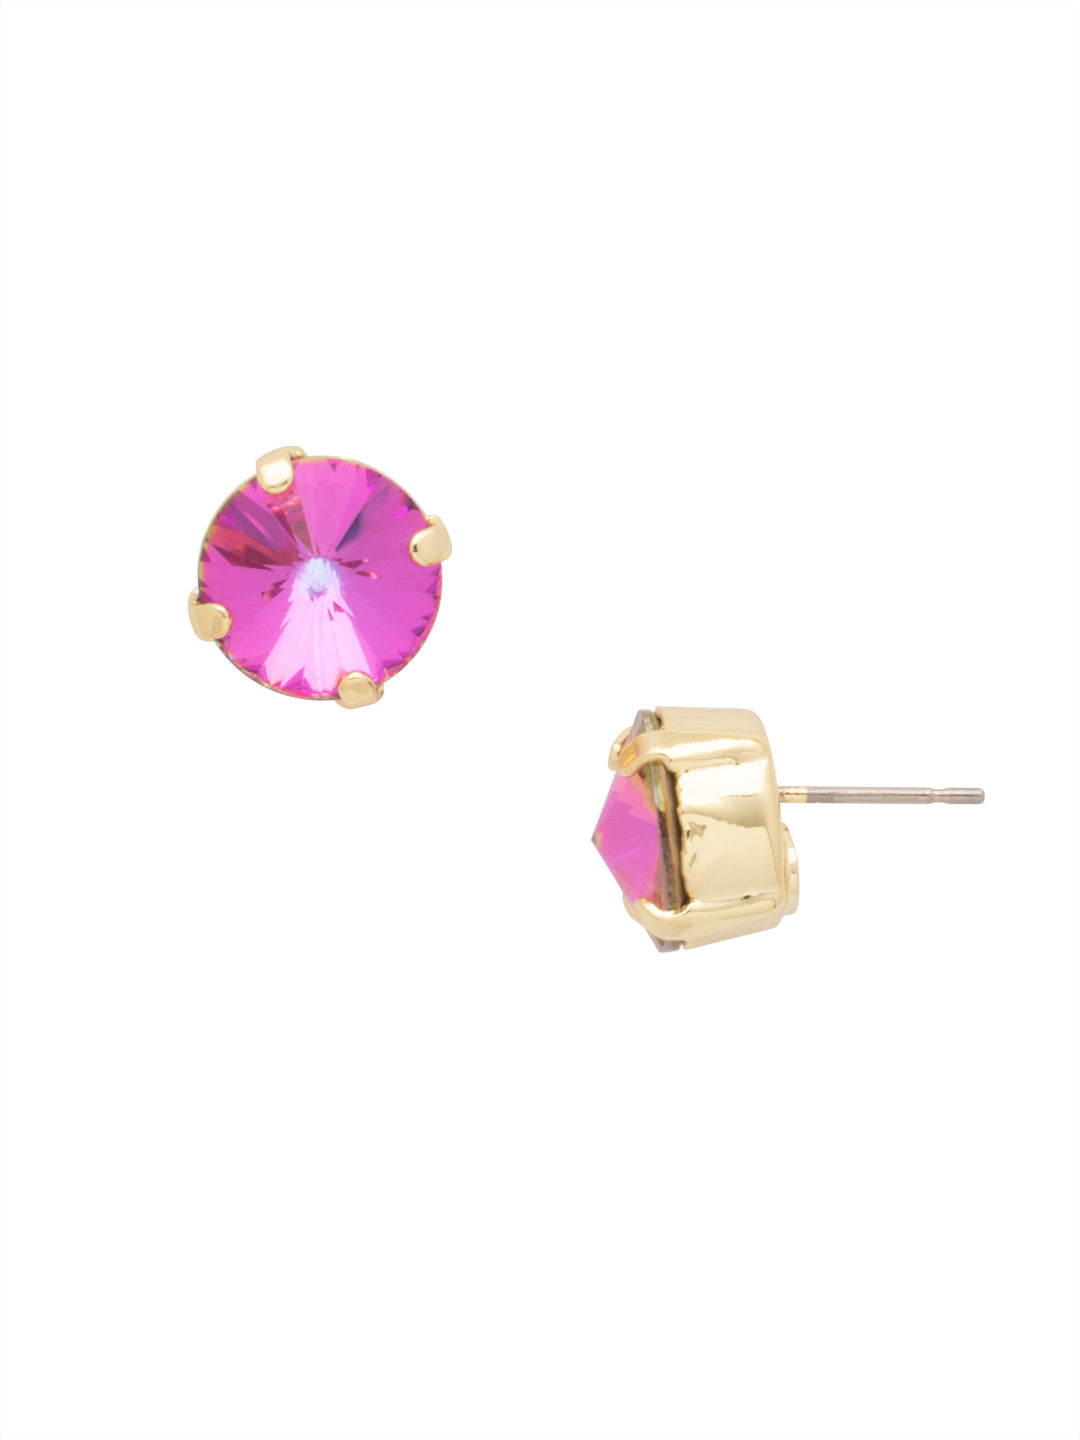 London Stud Earrings - ECM14BGFIS - <p>Everyone needs a great pair of studs. Add some classic sparkle to any occasion with these stud earrings. Need help picking a stud? <a href="https://www.sorrelli.com/blogs/sisterhood/round-stud-earrings-101-a-rundown-of-sizes-styles-and-sparkle">Check out our size guide!</a> From Sorrelli's Fireside collection in our Bright Gold-tone finish.</p>